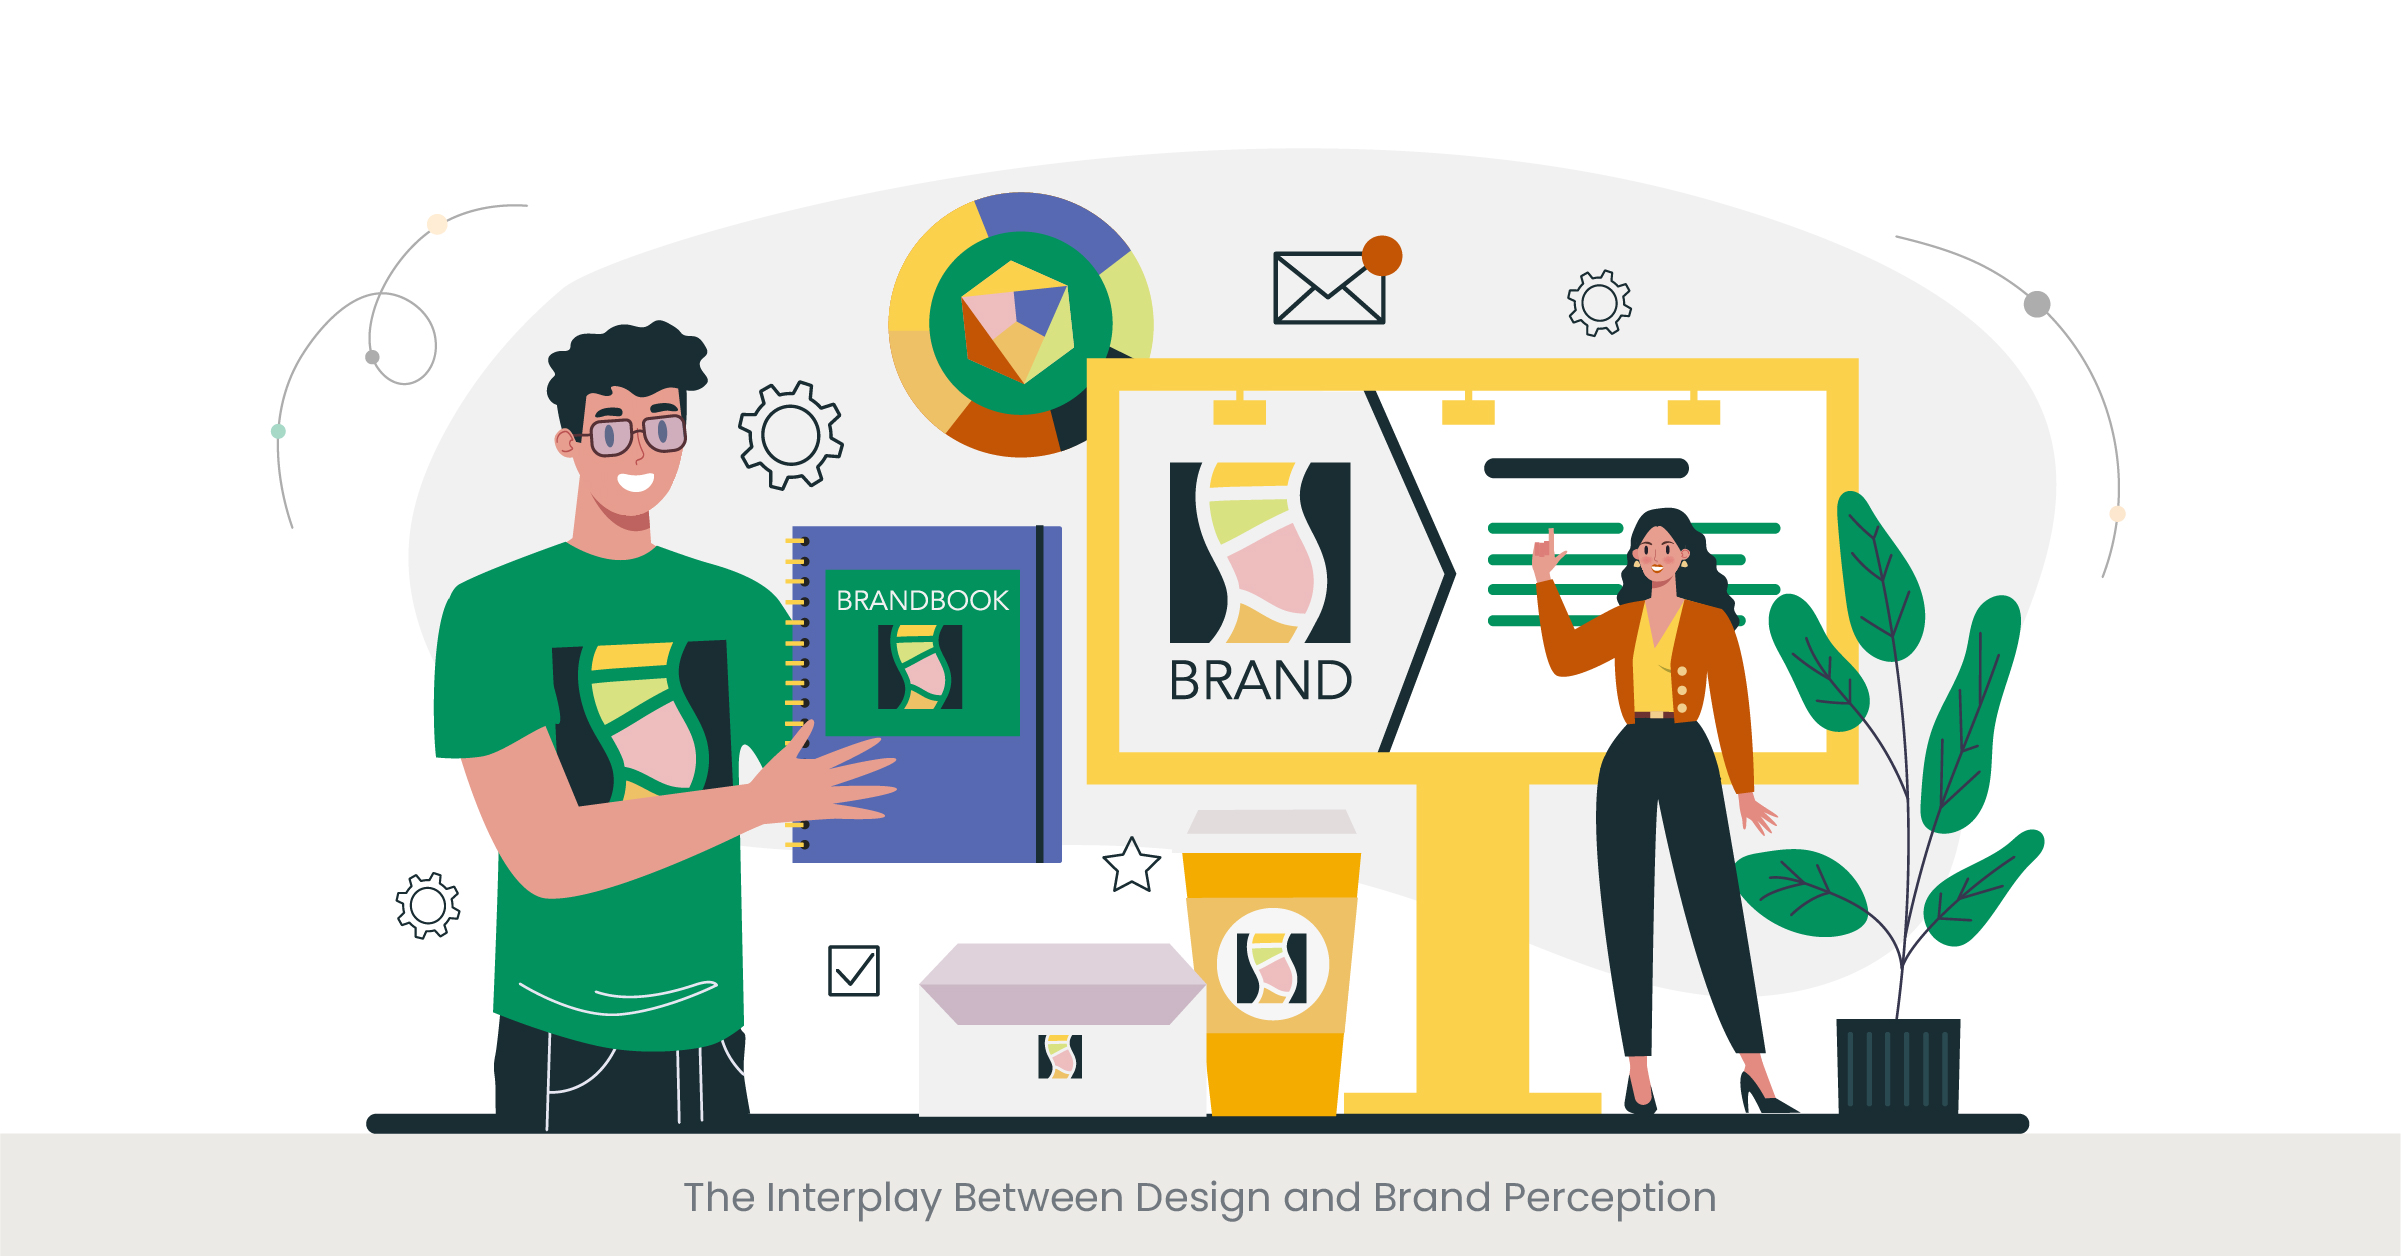 The Interplay Between Design and Brand Perception